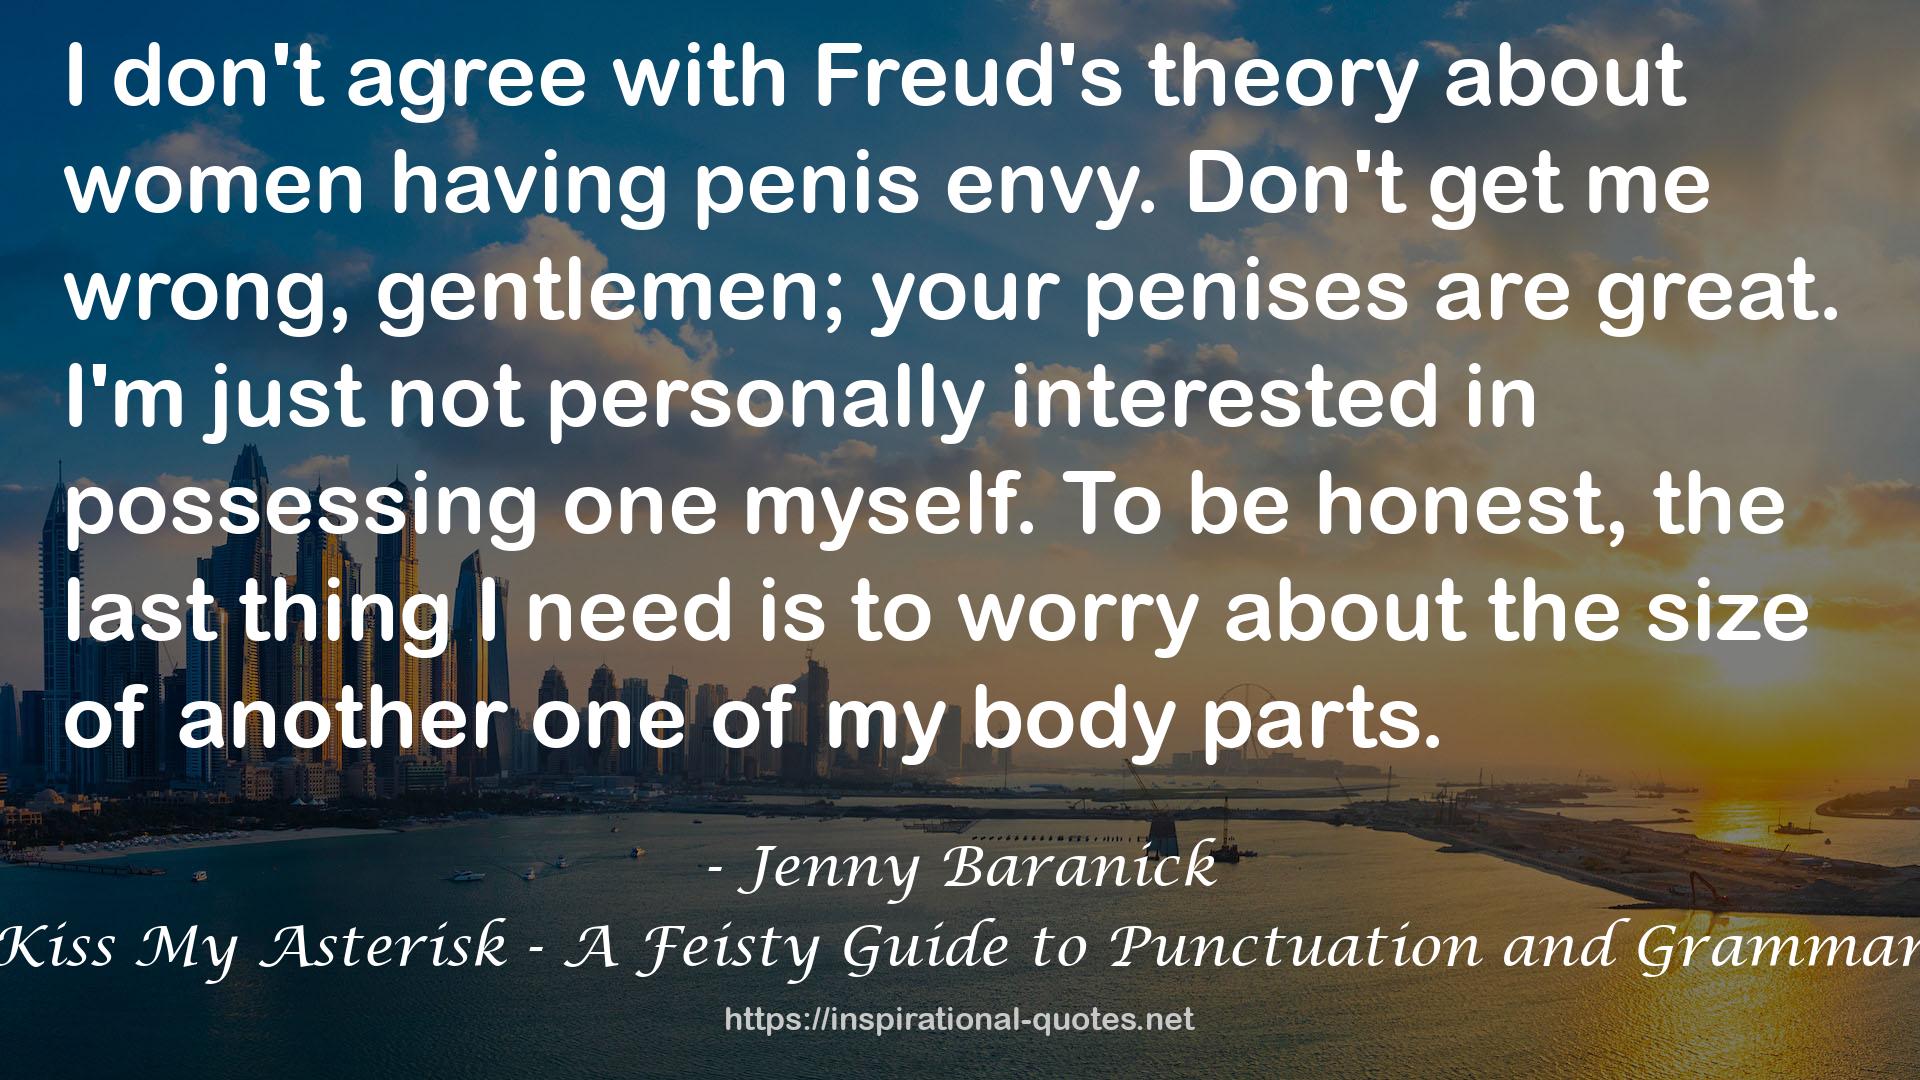 Kiss My Asterisk - A Feisty Guide to Punctuation and Grammar QUOTES